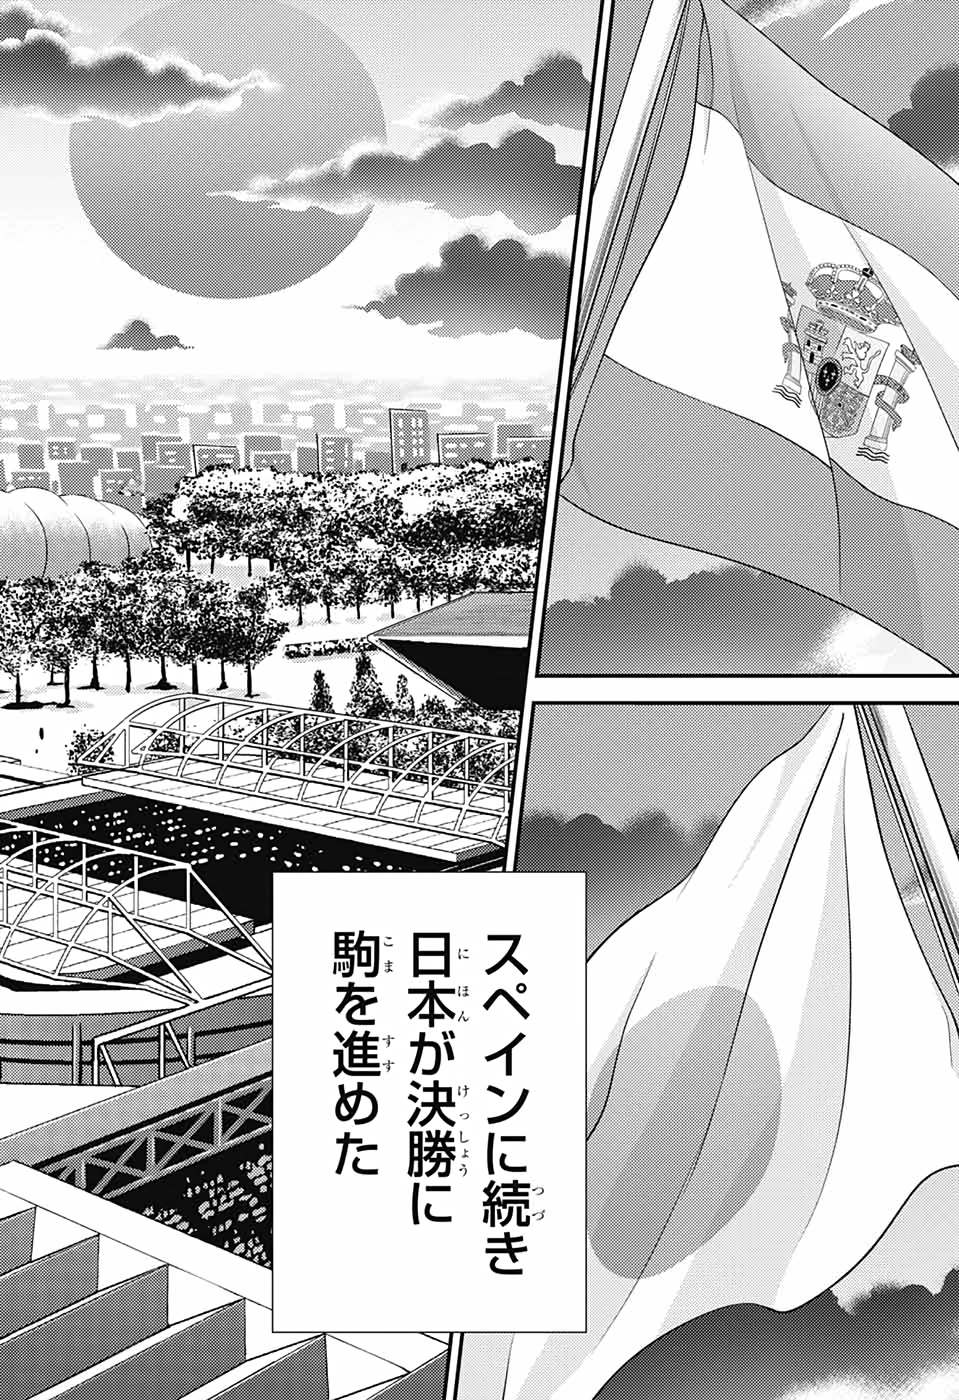 mørke I værtinde Shonen Salto on X: "Next month in New Prince of Tennis, the final of the  U-18 World Cup between Japan and Spain will start https://t.co/ZaphGV4u4U"  / X